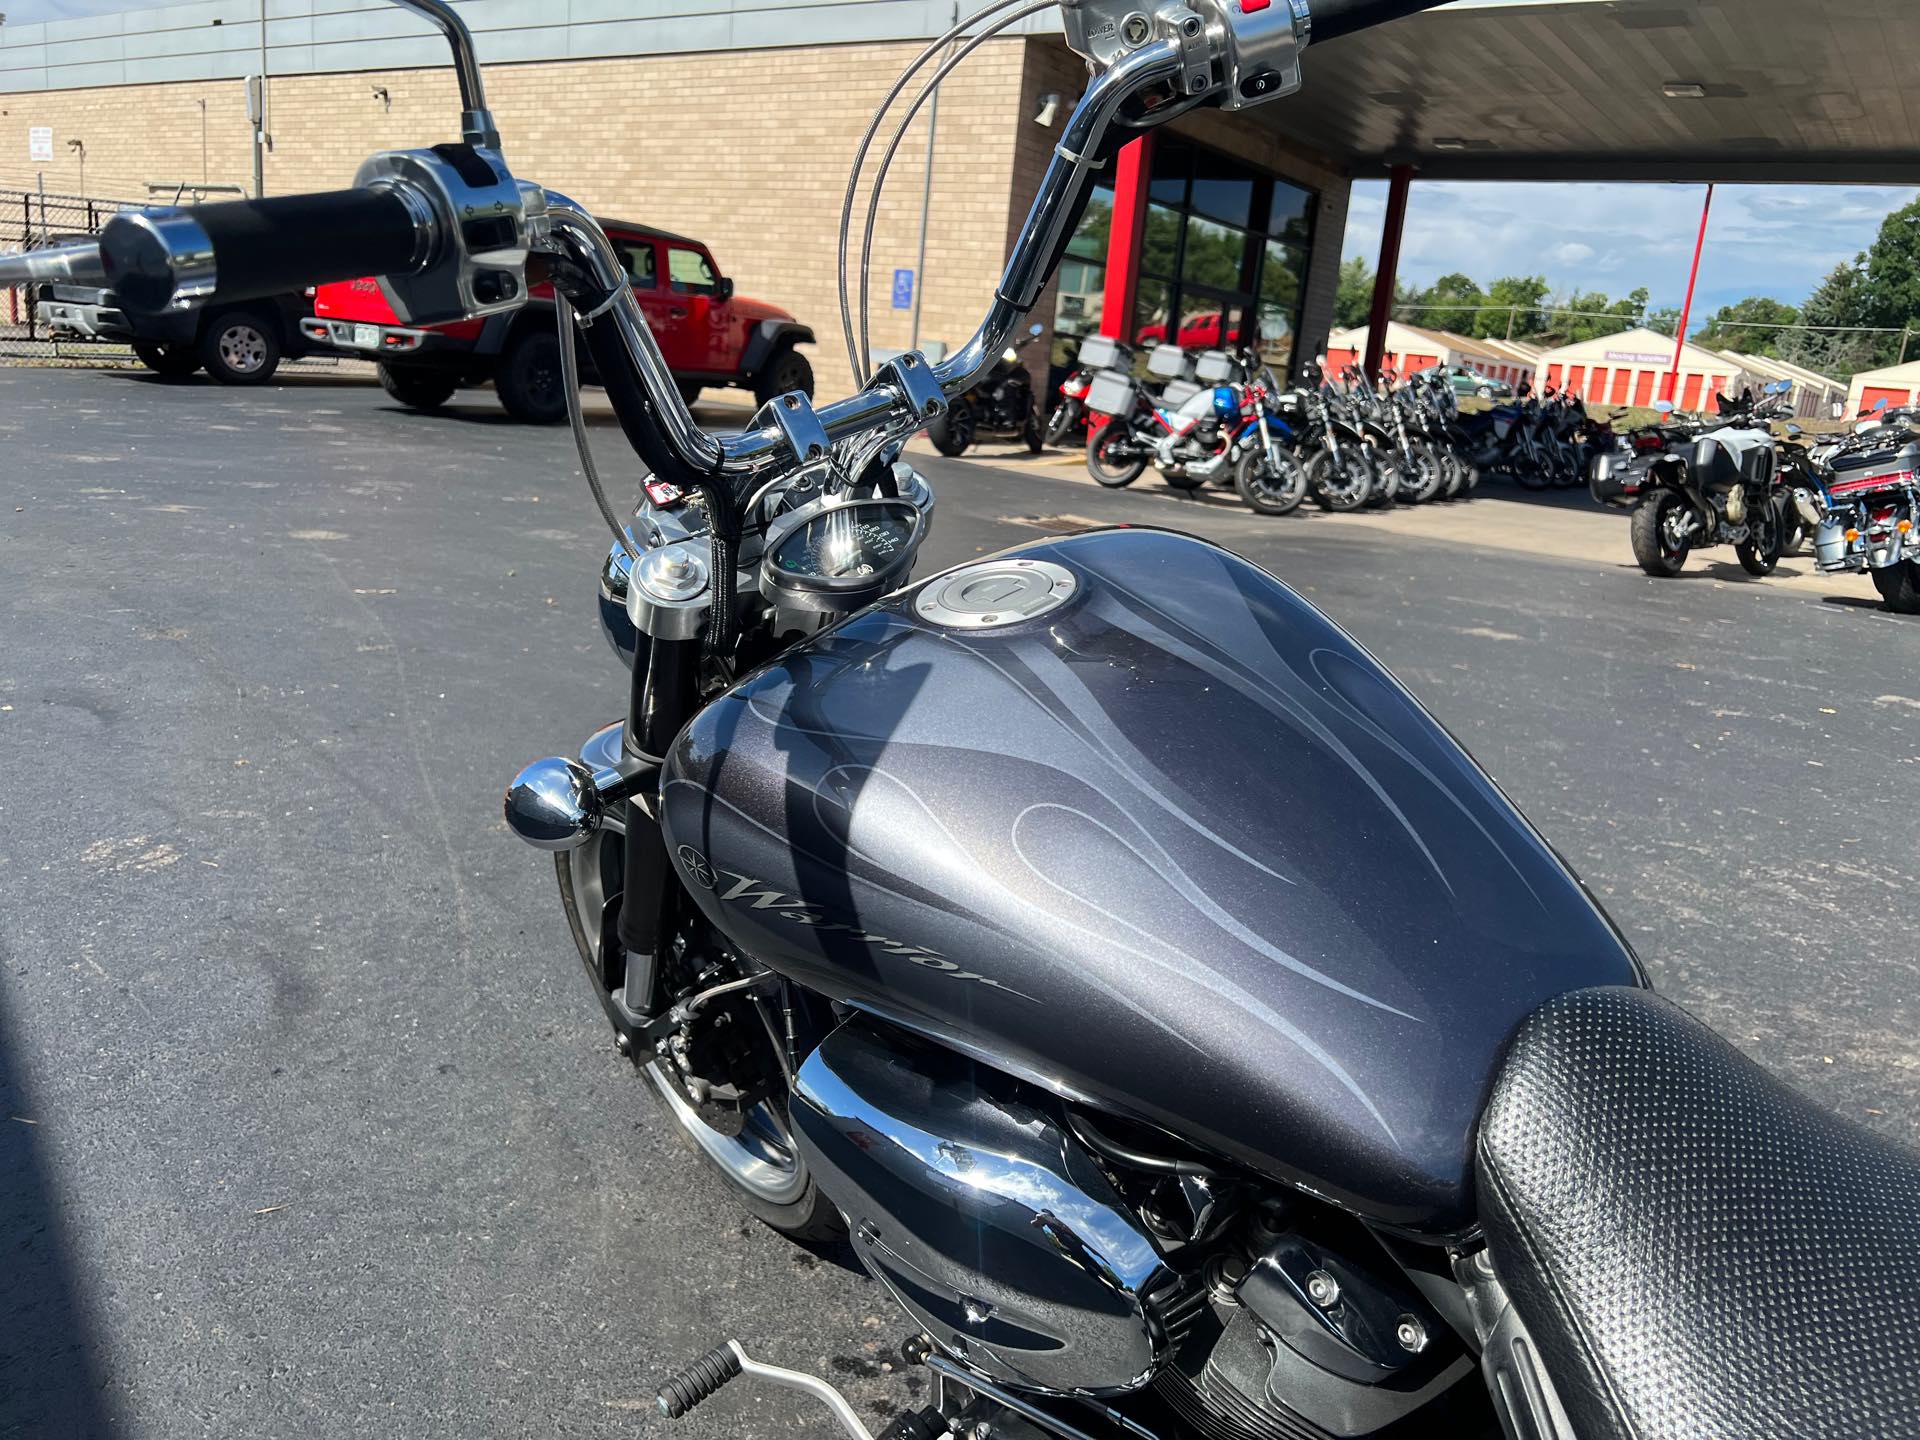 2004 Yamaha Road Star Warrior at Aces Motorcycles - Fort Collins